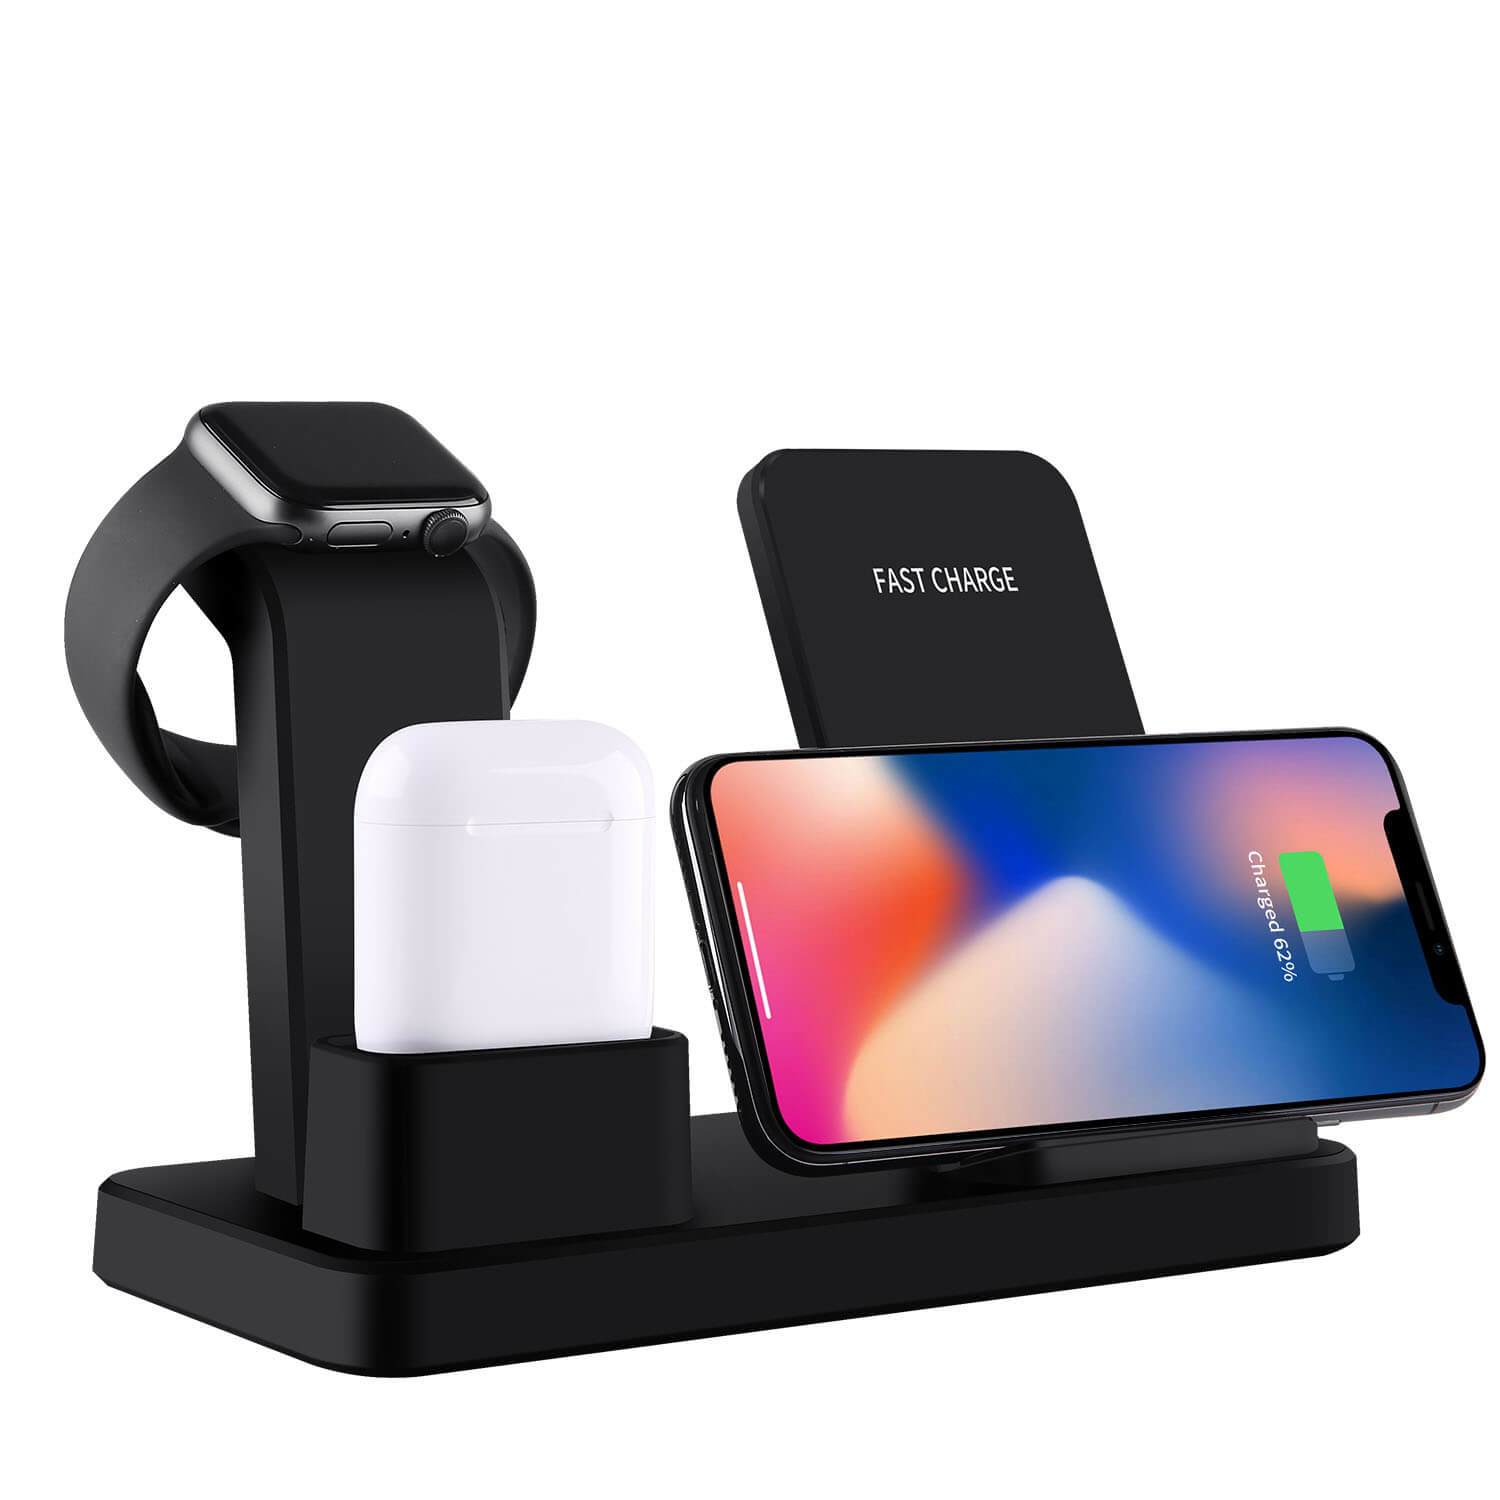 Wireless Charger Stand Black 3 in 1 Phone Qi Watch Dock 10W (Including AC Power Adapter) (110041)